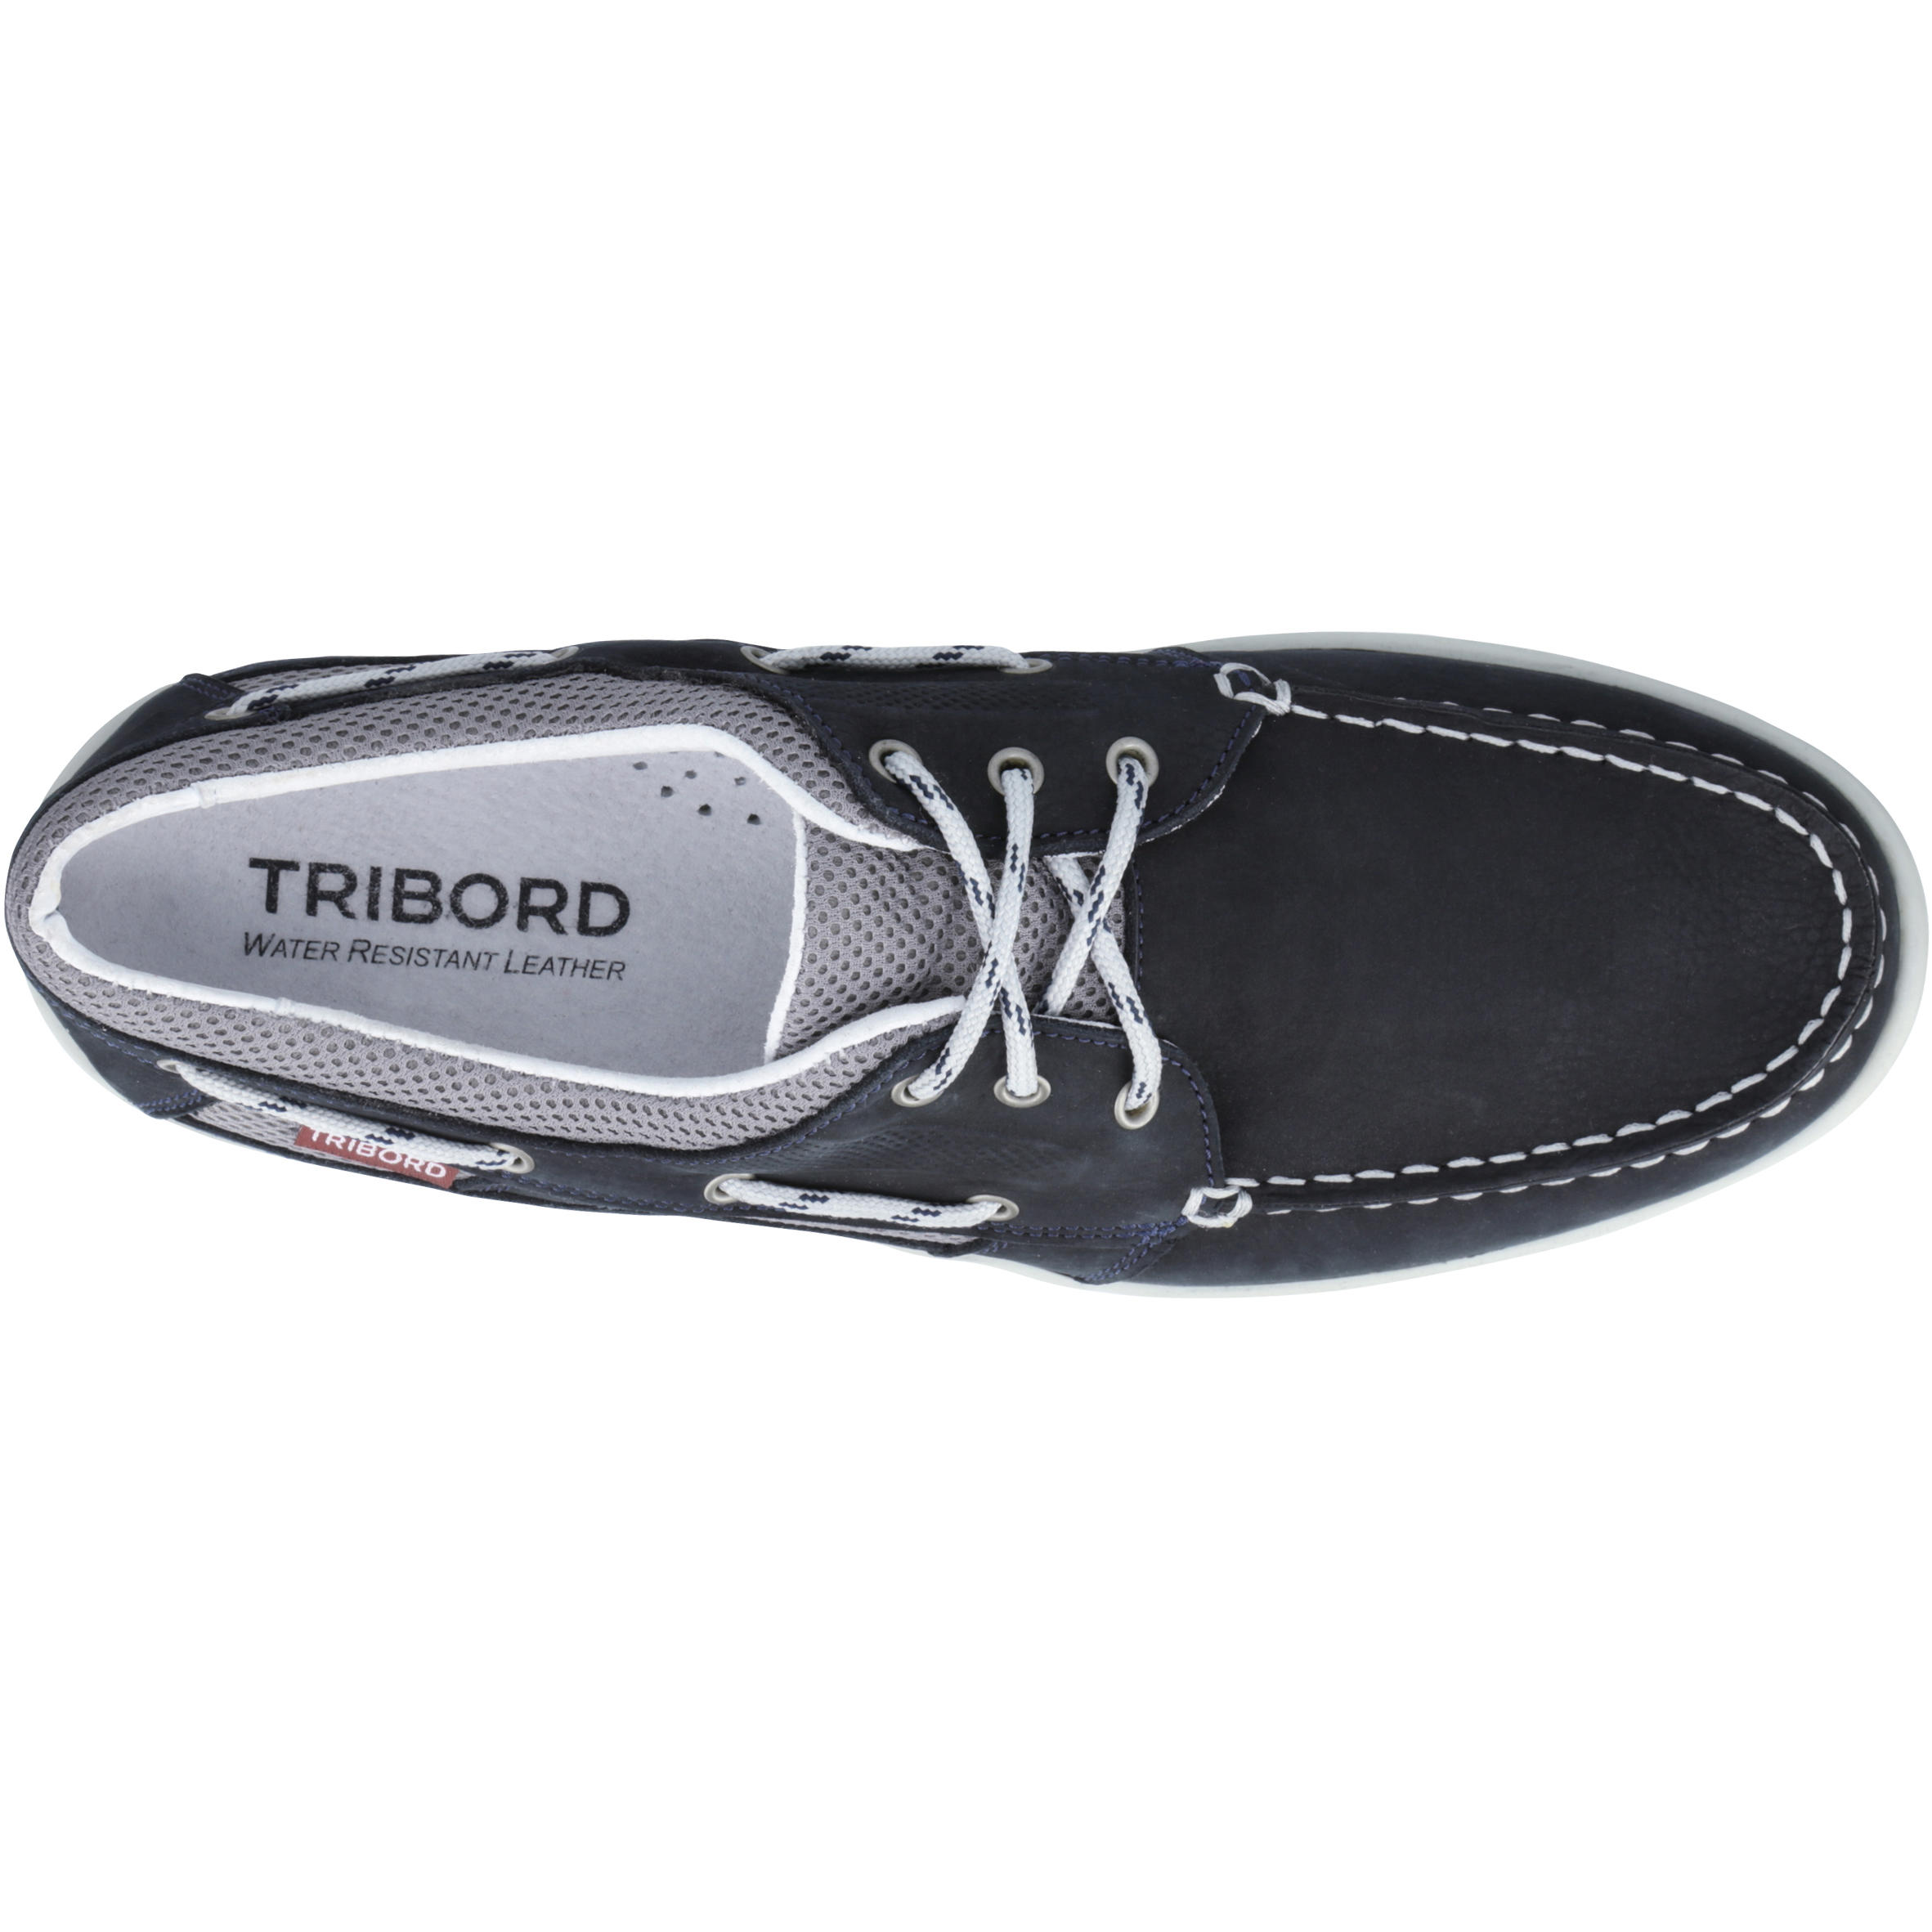 Leather Boat Shoes – Men’s - TRIBORD